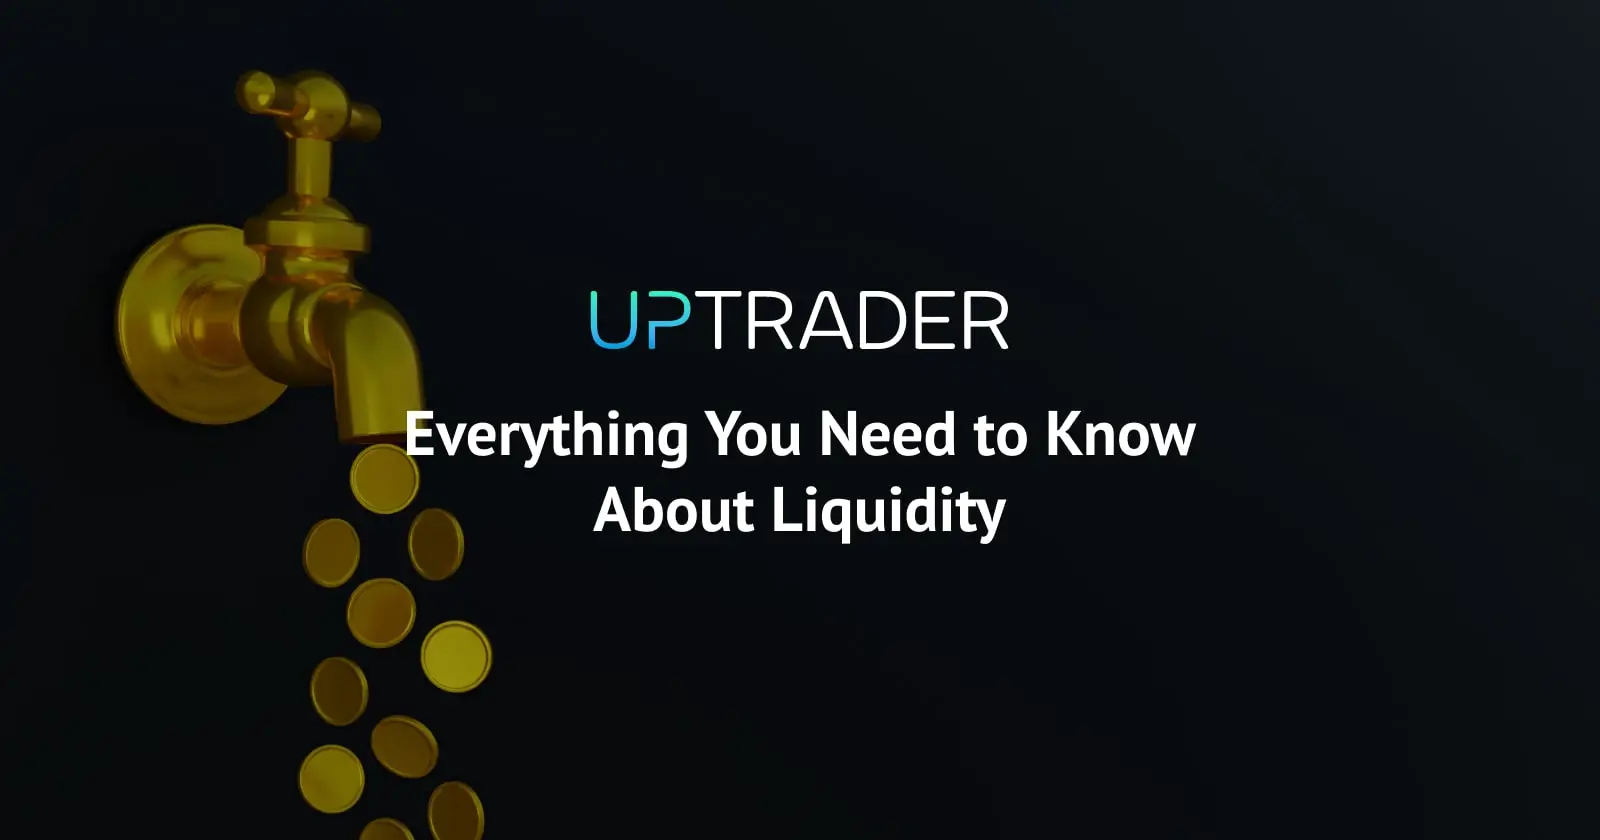 Everything You Need to Know About Liquidity